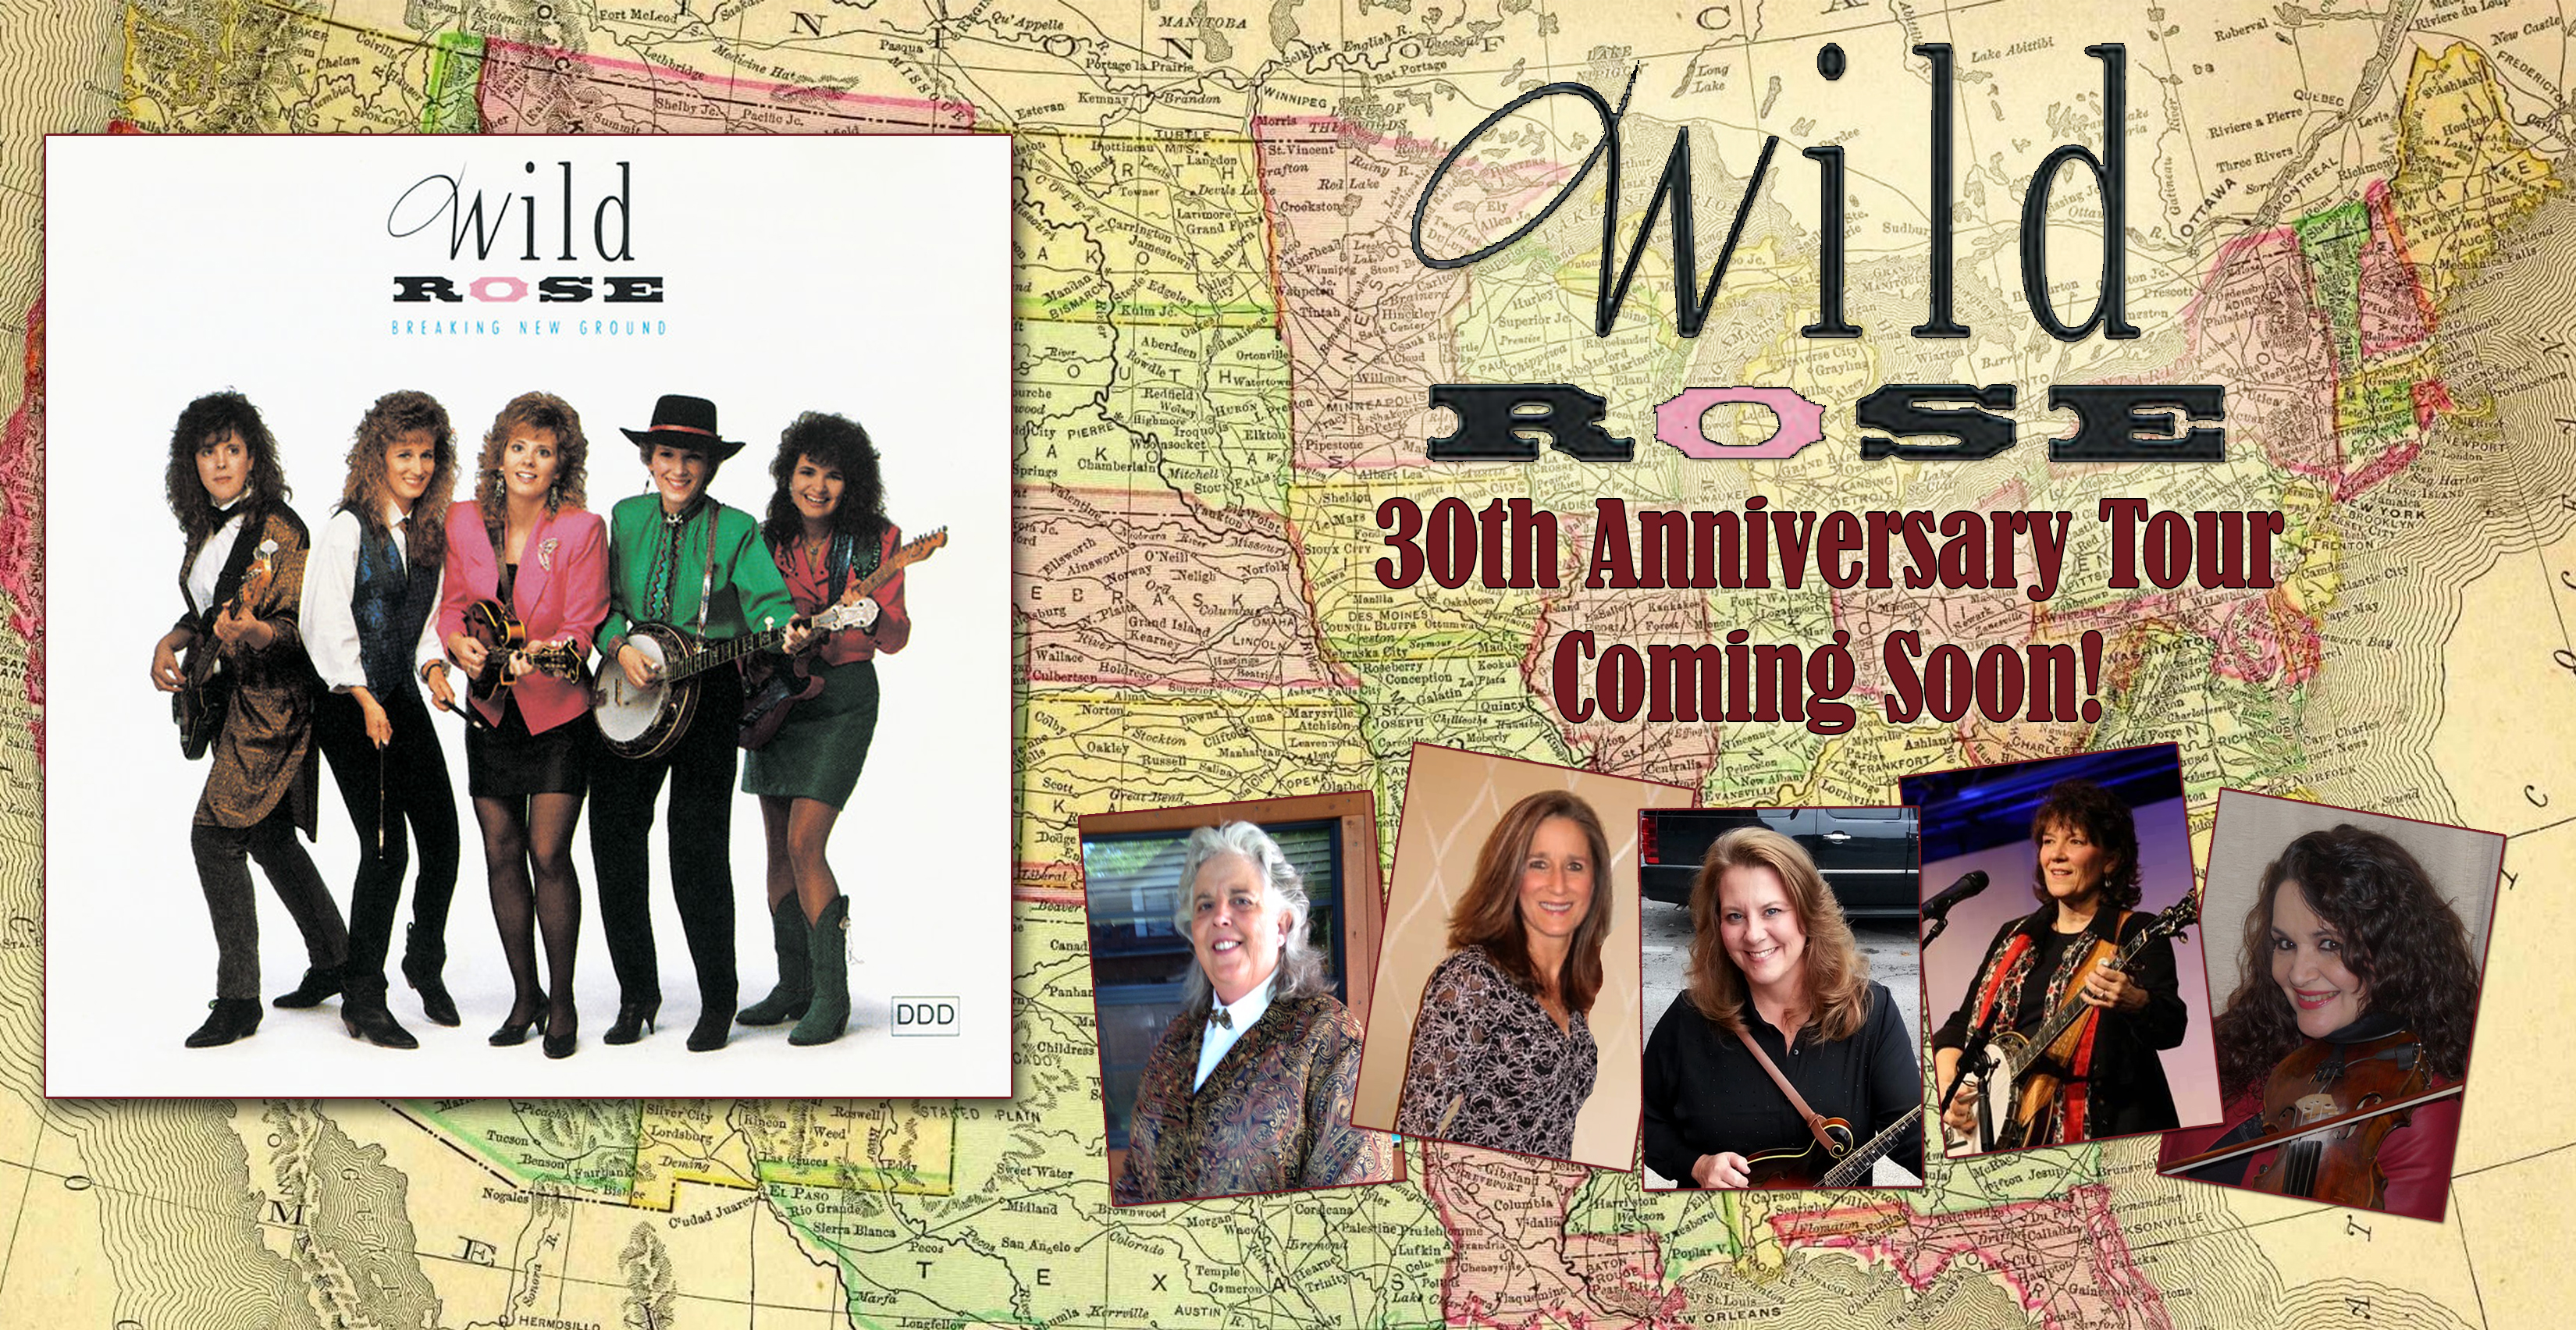 WoodSongs Dalton to Feature Wild Rose and the Burchfield Family Band